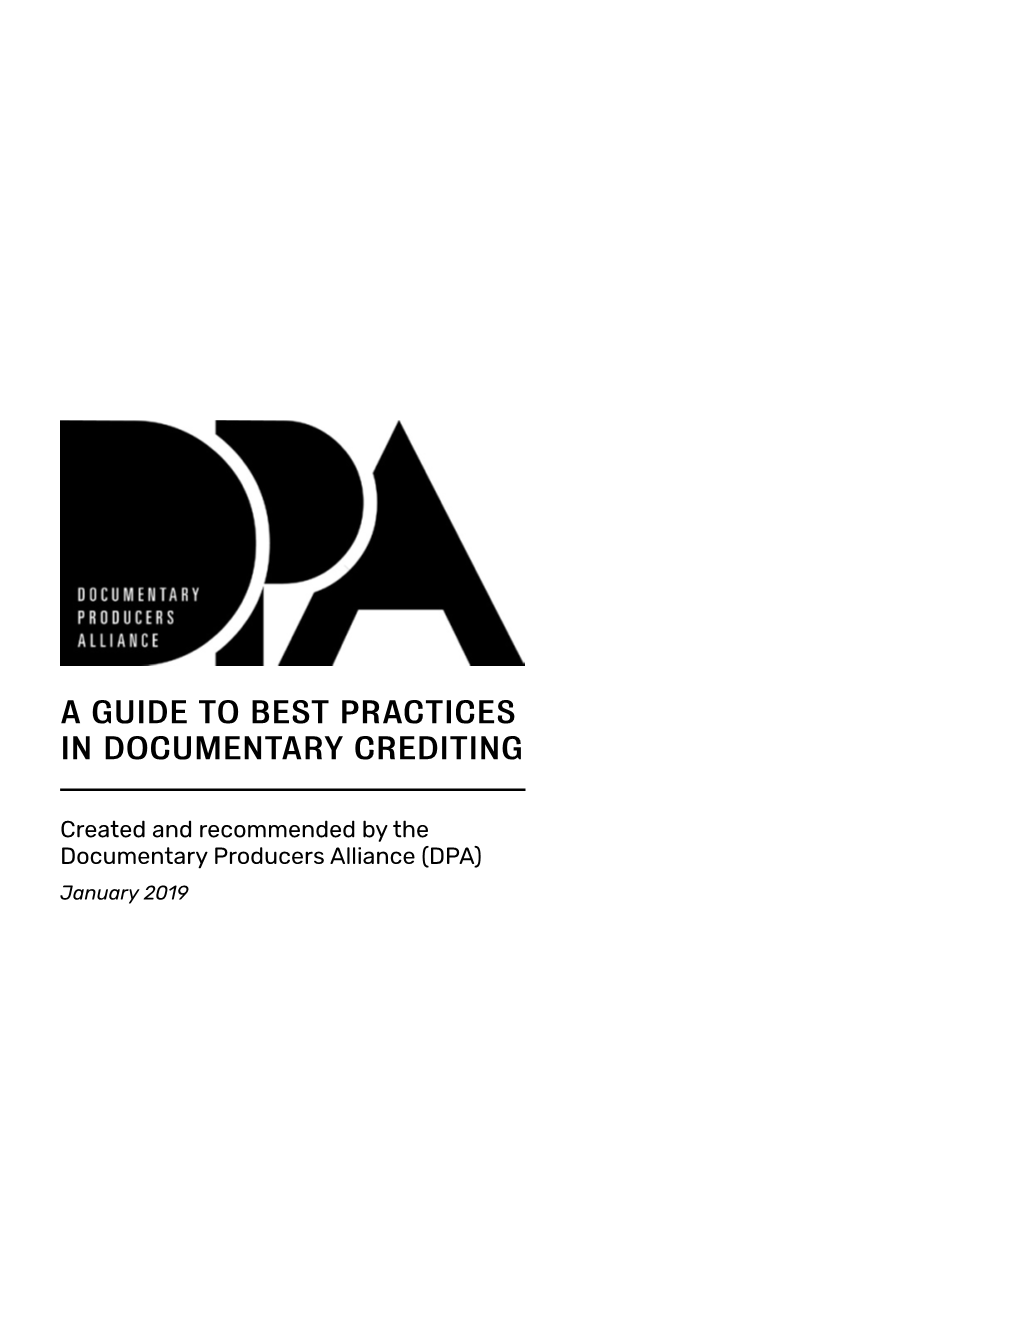 A Guide to Best Practices in Documentary Crediting